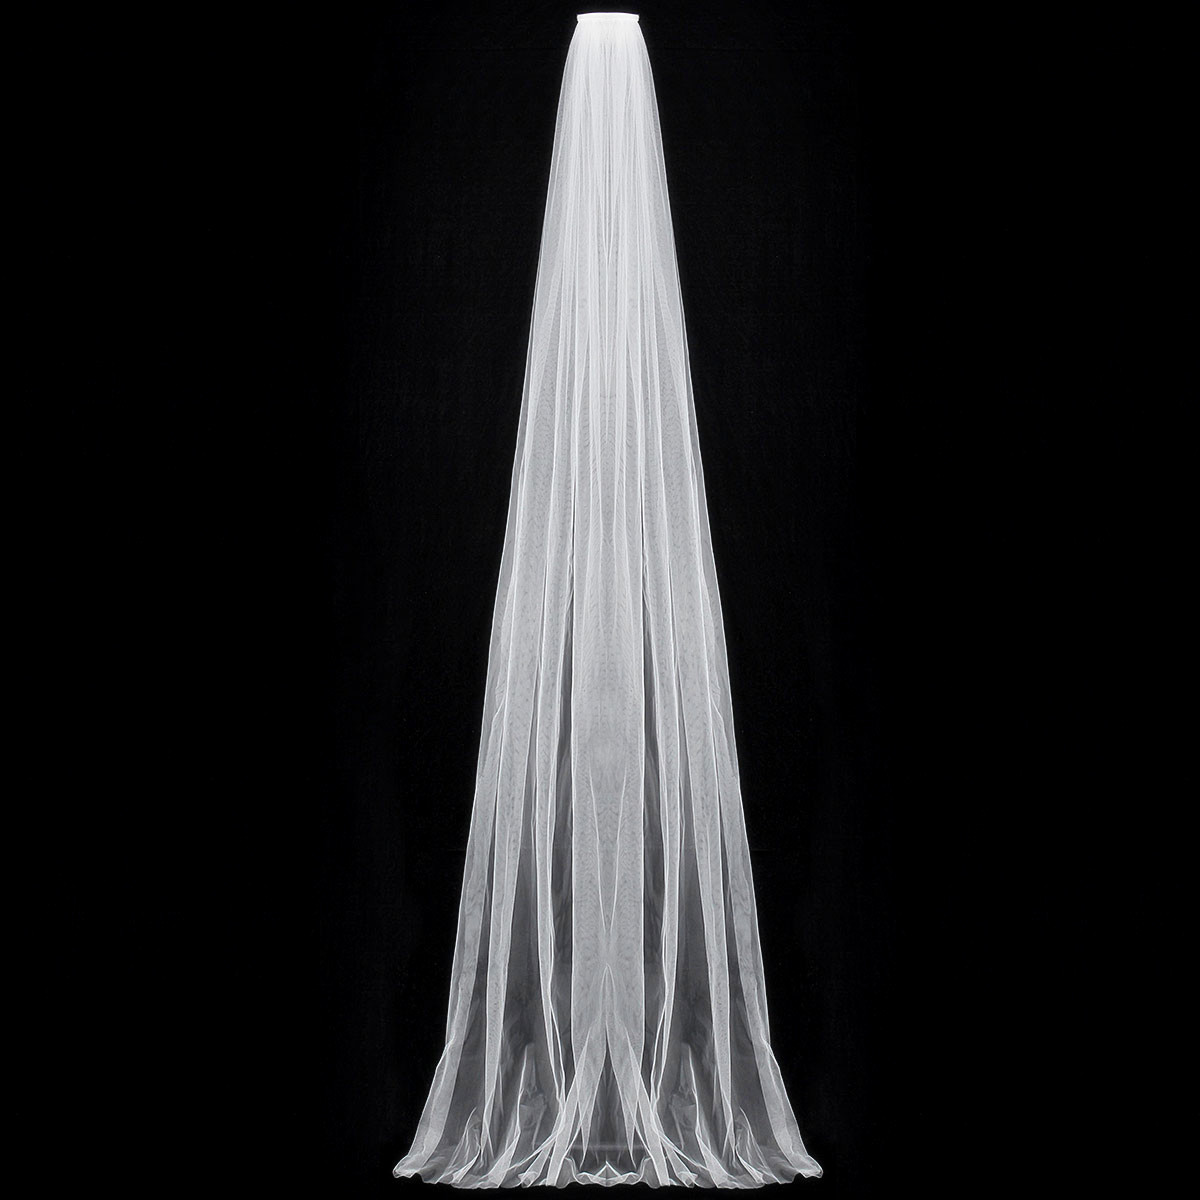 Wedding-Veil-One-Layer-Long-Veil-Comb-Soft-Tulle-Cut-Edge-Cathedral-Bride-Accessories-1000038